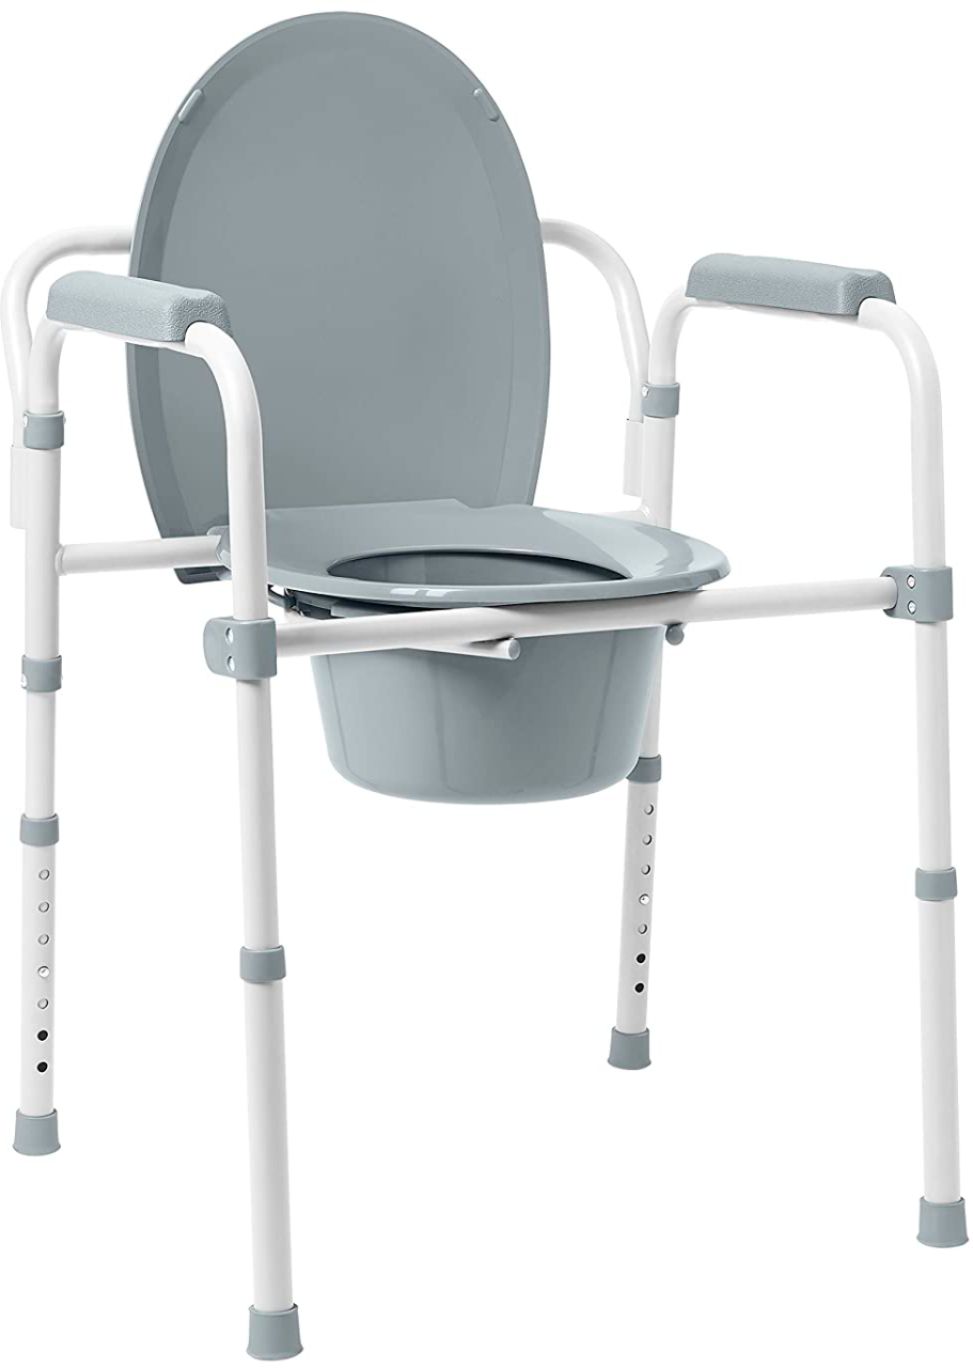 Angle View: Medline 3-in-1 Steel Bedside Commode, Elongated Seat, Folding Frame, Supports up to 350 lbs. - Gray